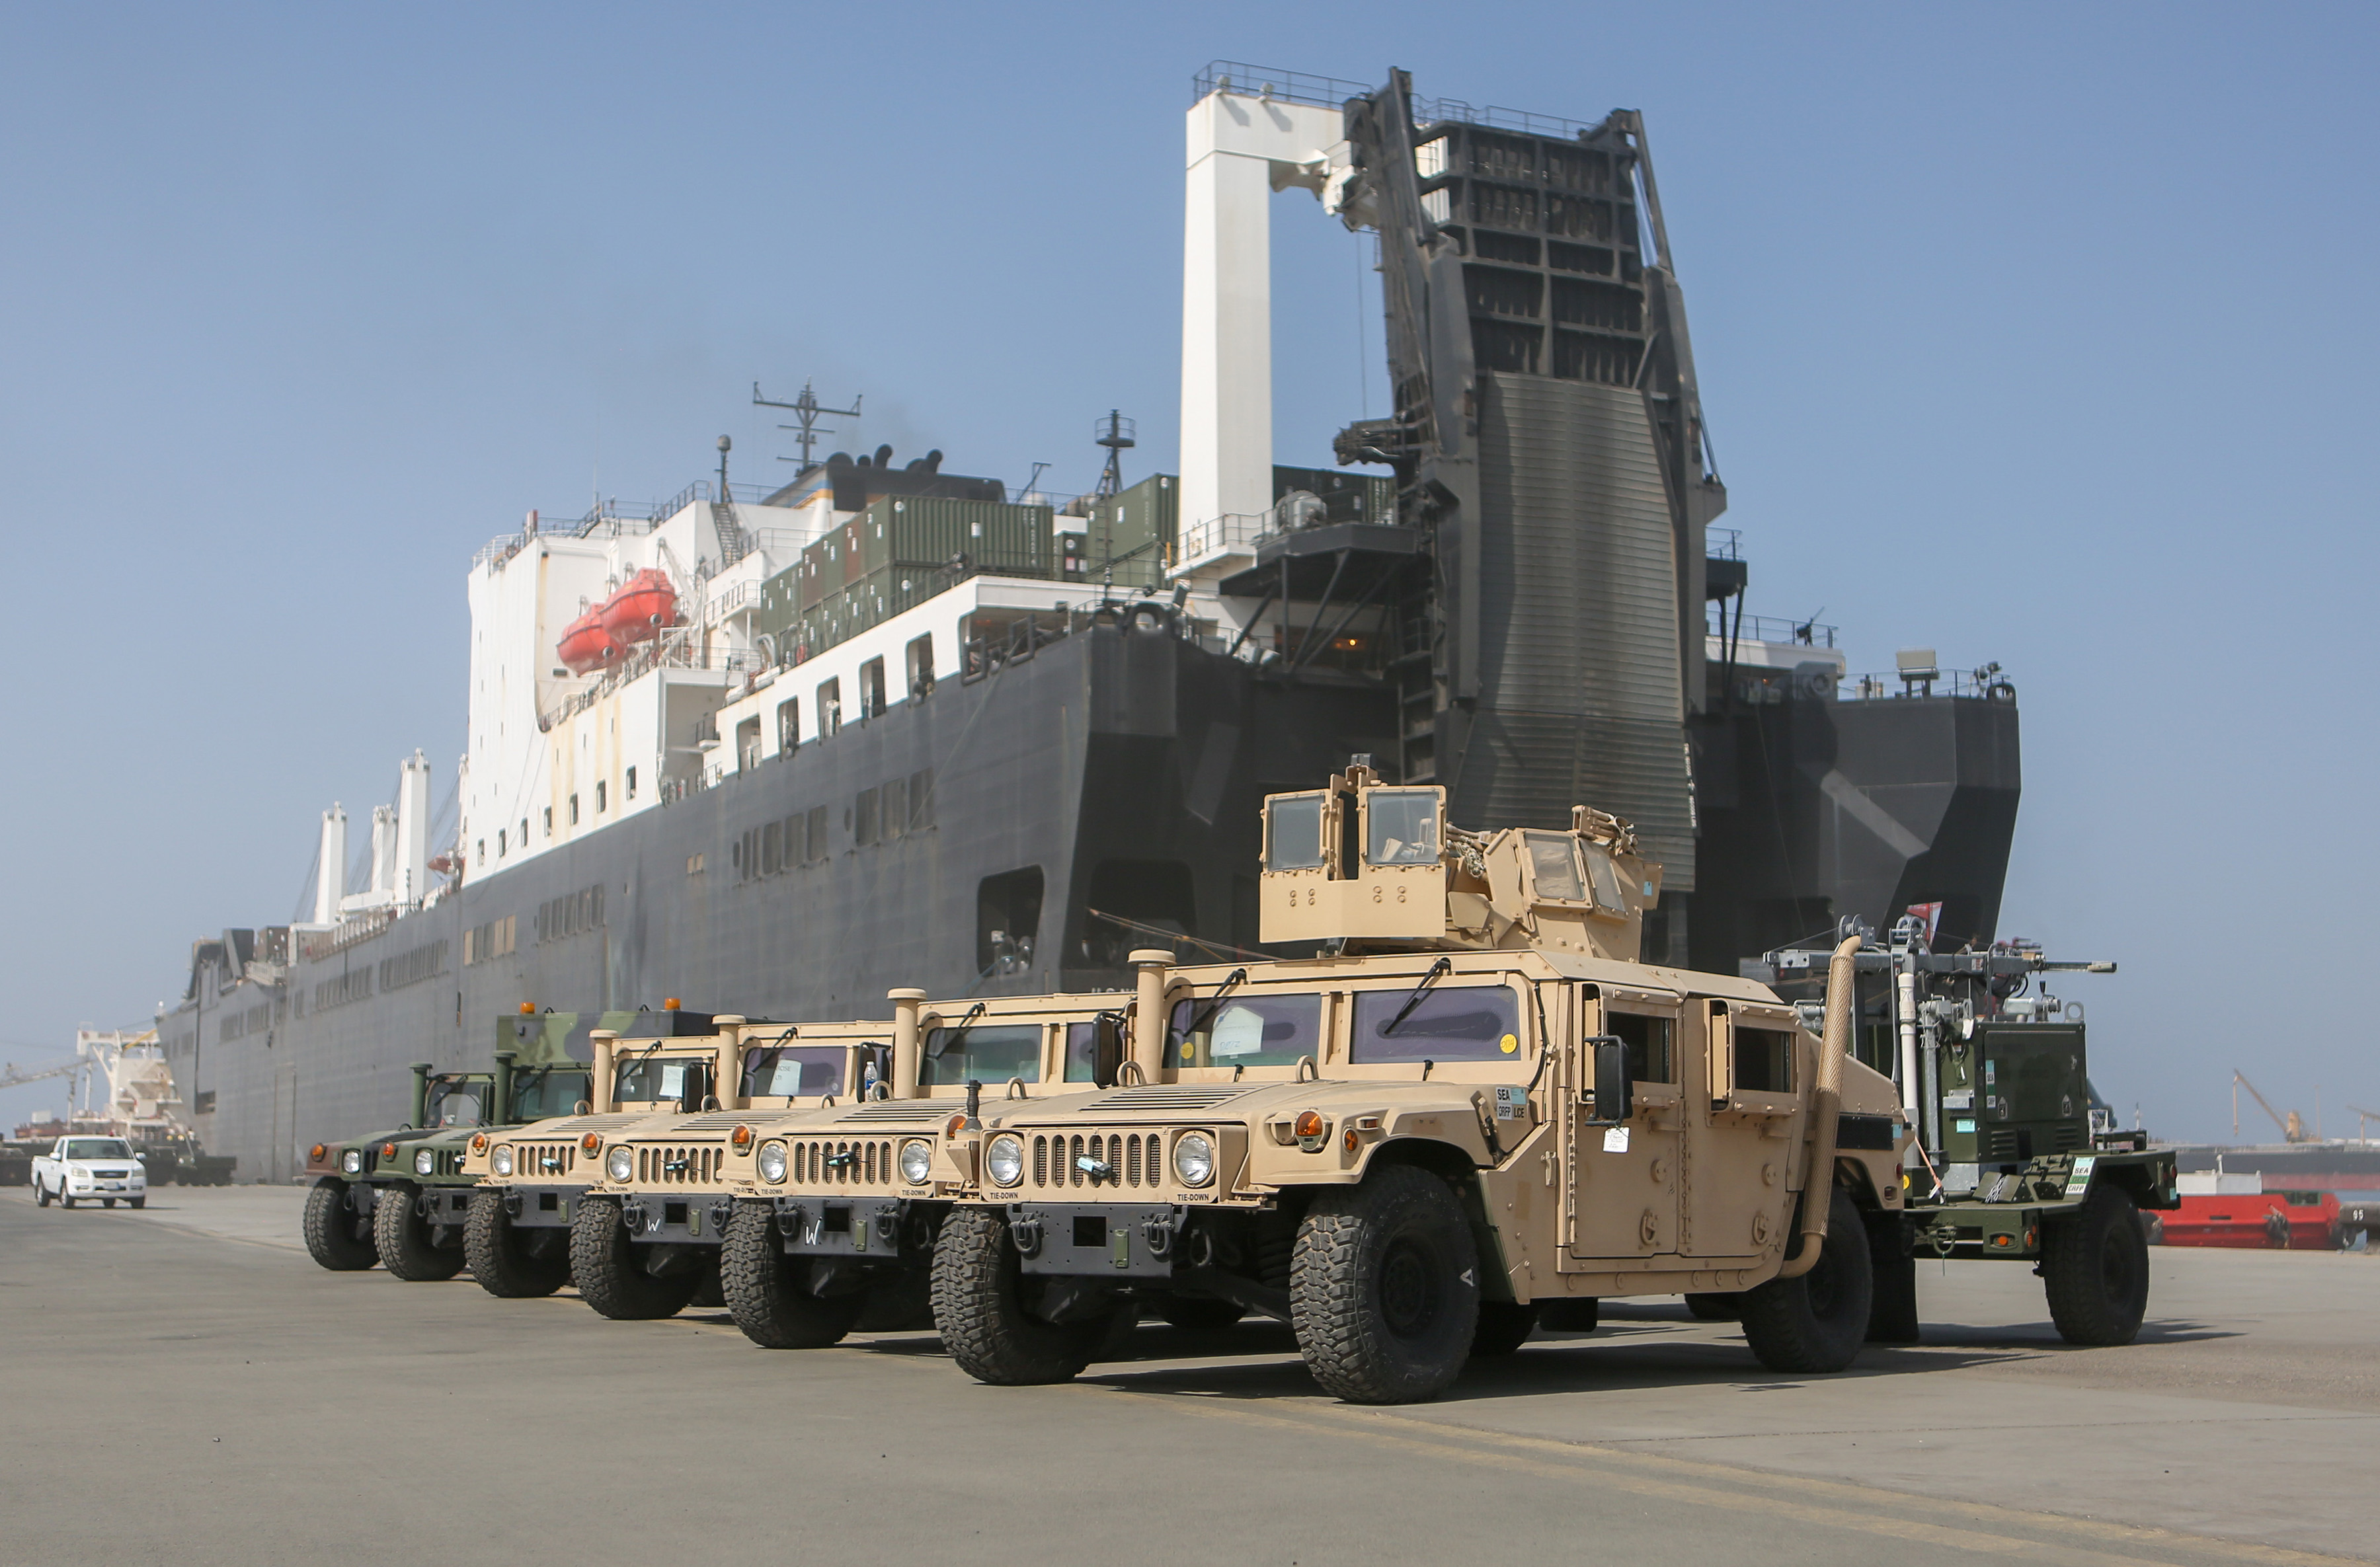 U.S. Marine Corps vehicles are staged for loading